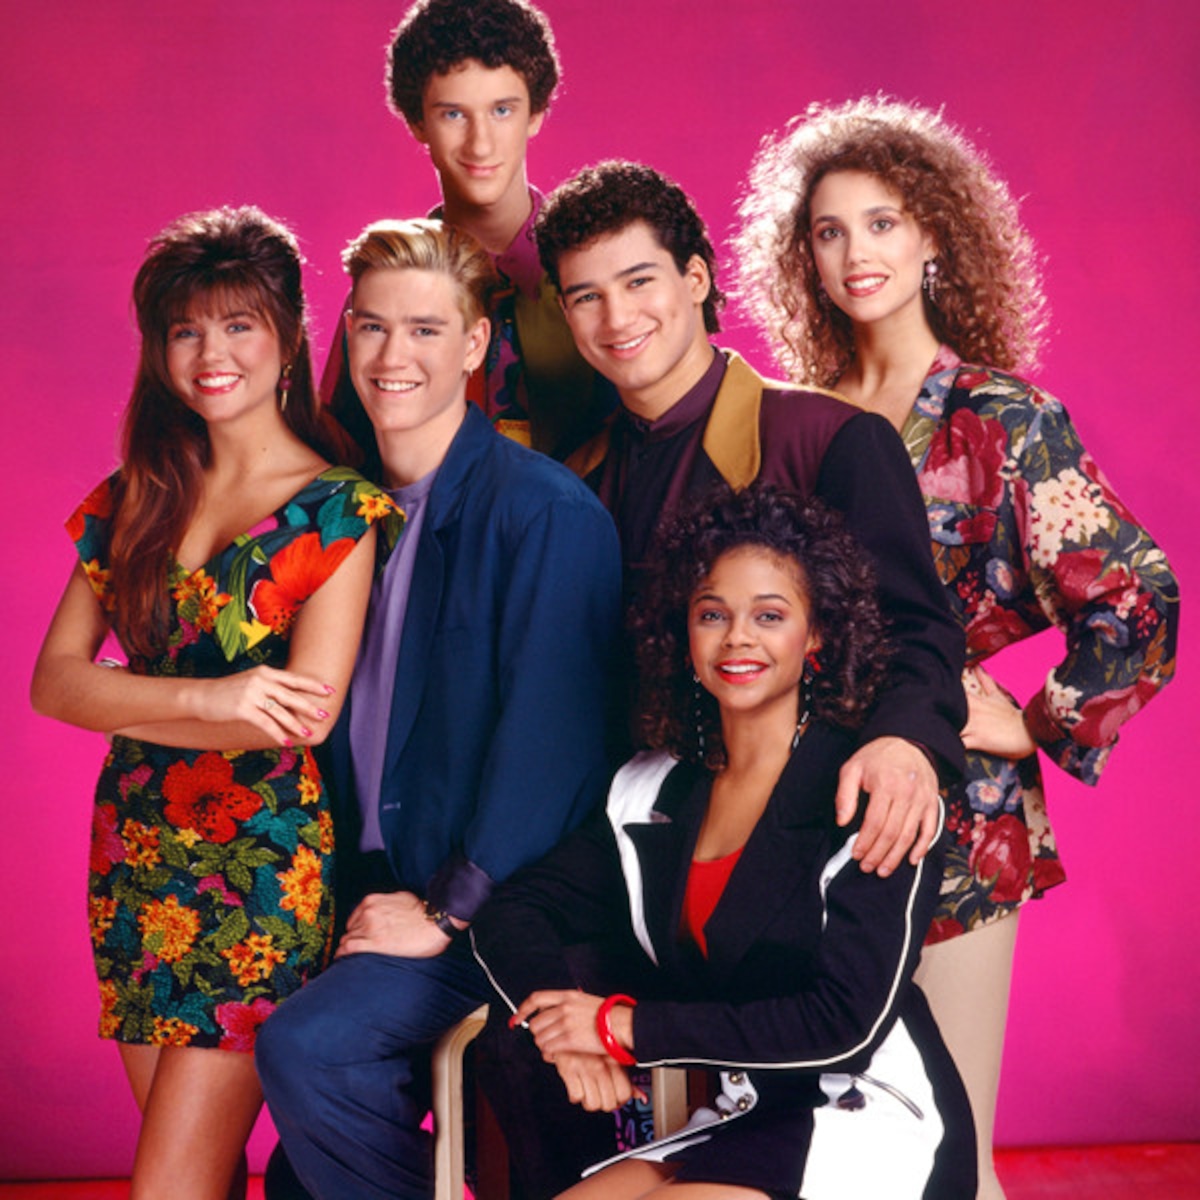 Lima collegegeld Tien So. Many. Cast. Hookups: Saved By the Bell Secrets Revealed - E! Online